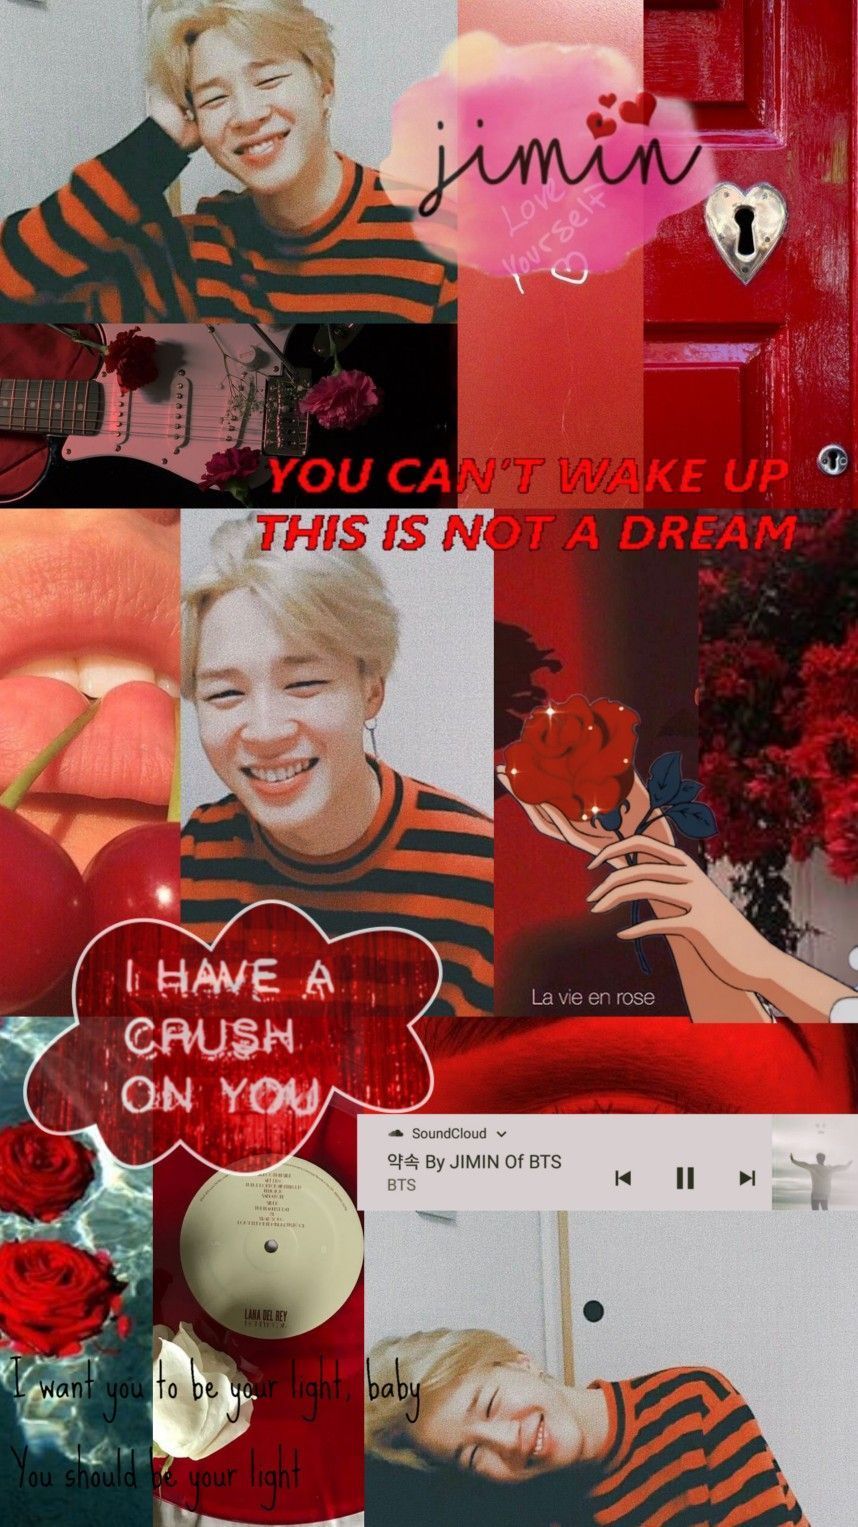 Aesthetic wallpaper for Jimin! Let me know if you want me to make more! - Jimin